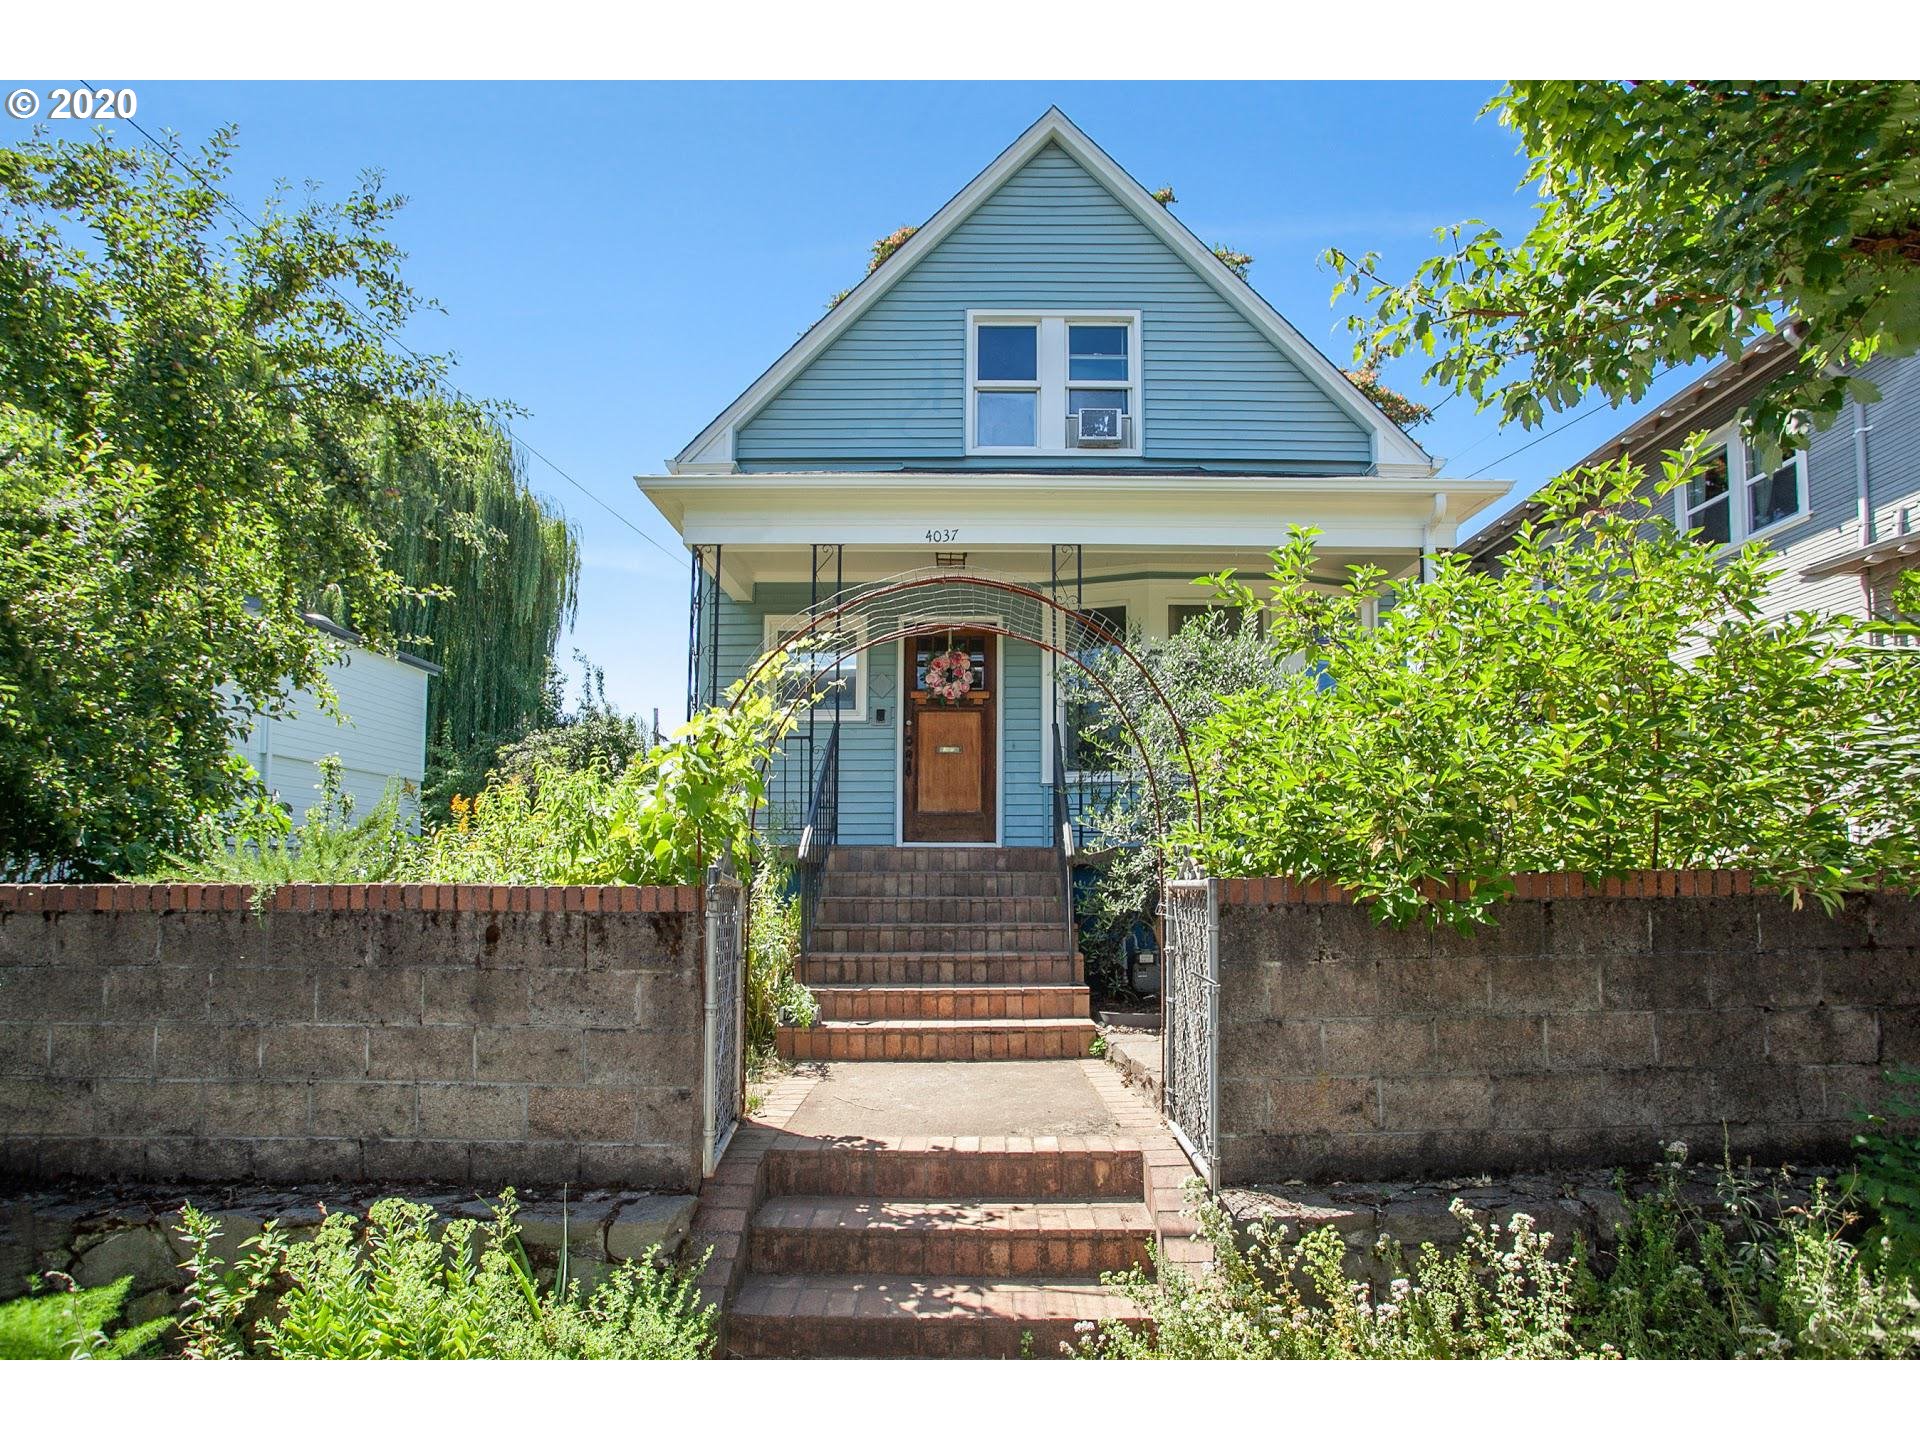 4037 N MONTANA AVE (1 of 31)